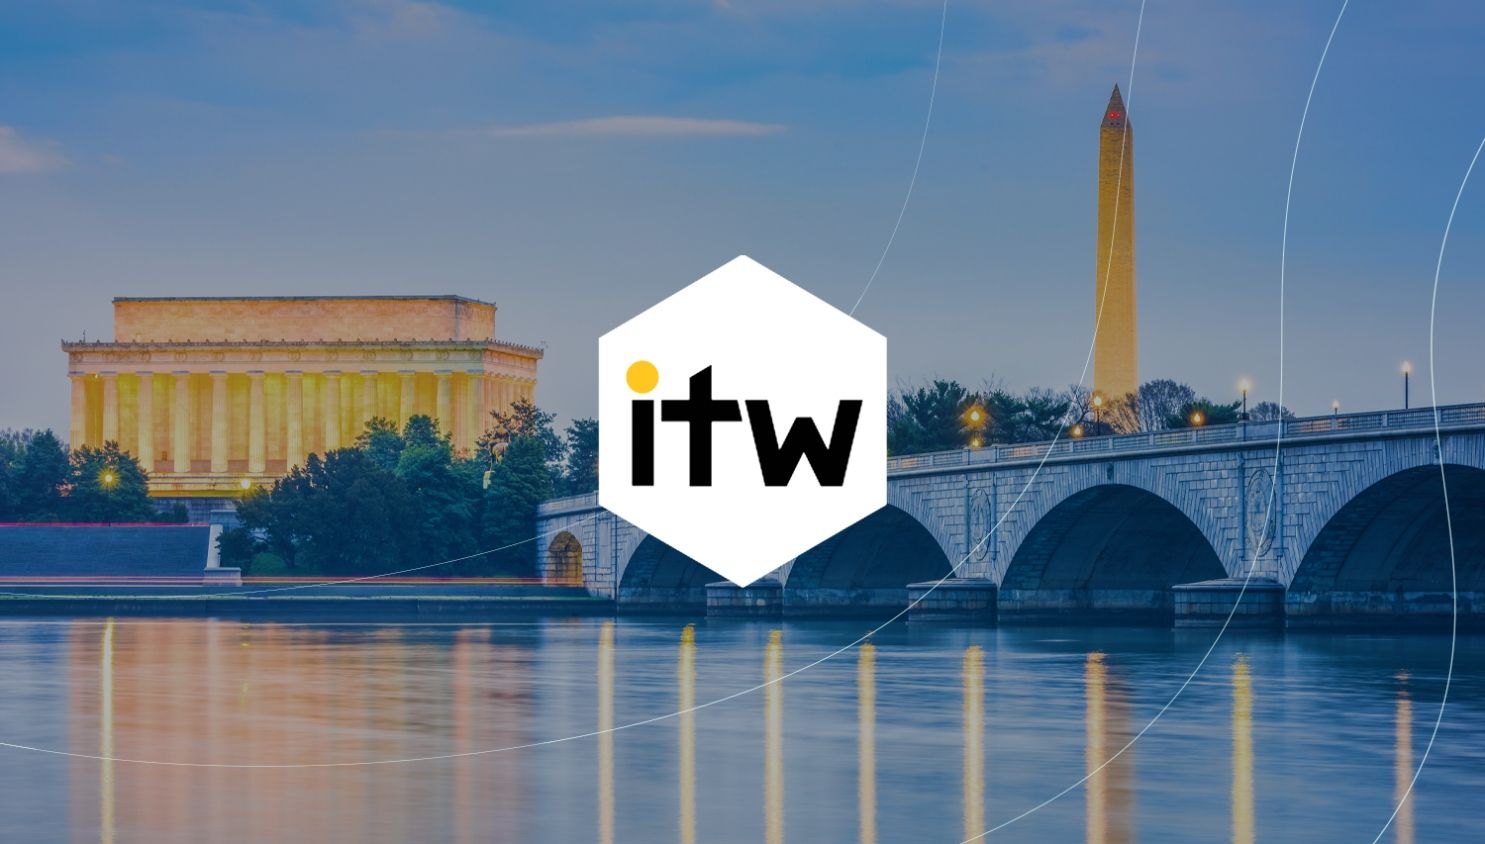 DIDWW showcasing its latest VoIP services at ITW 2022